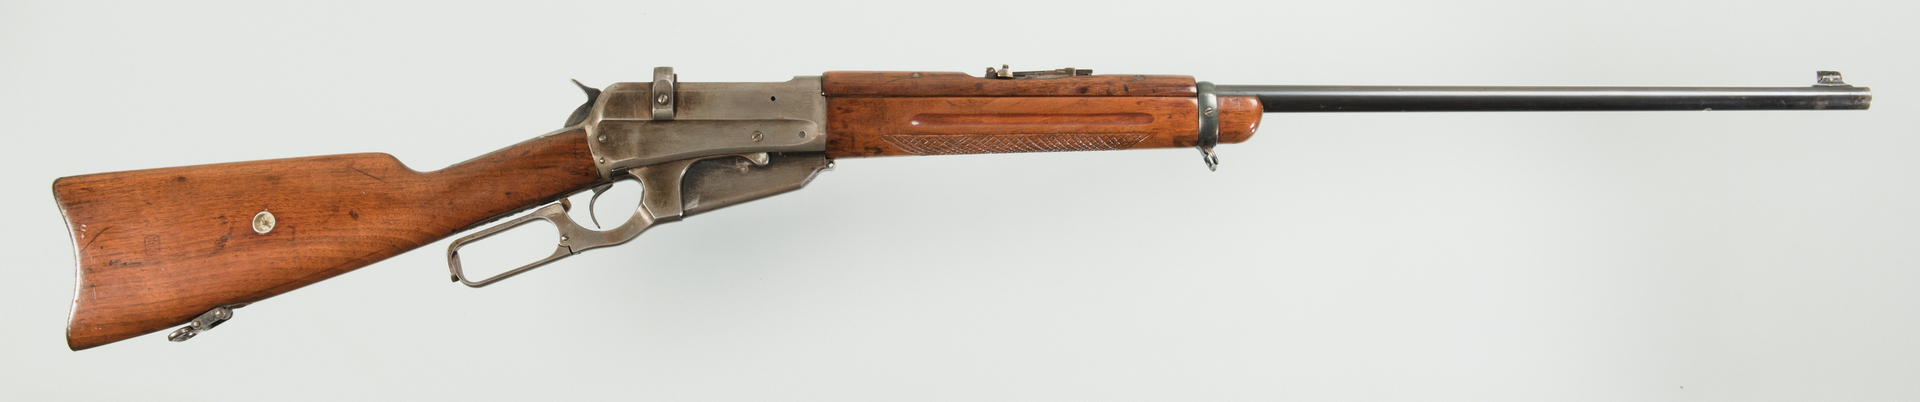 Winchester Model 1895 -7.62x54R Lever Action Rifle